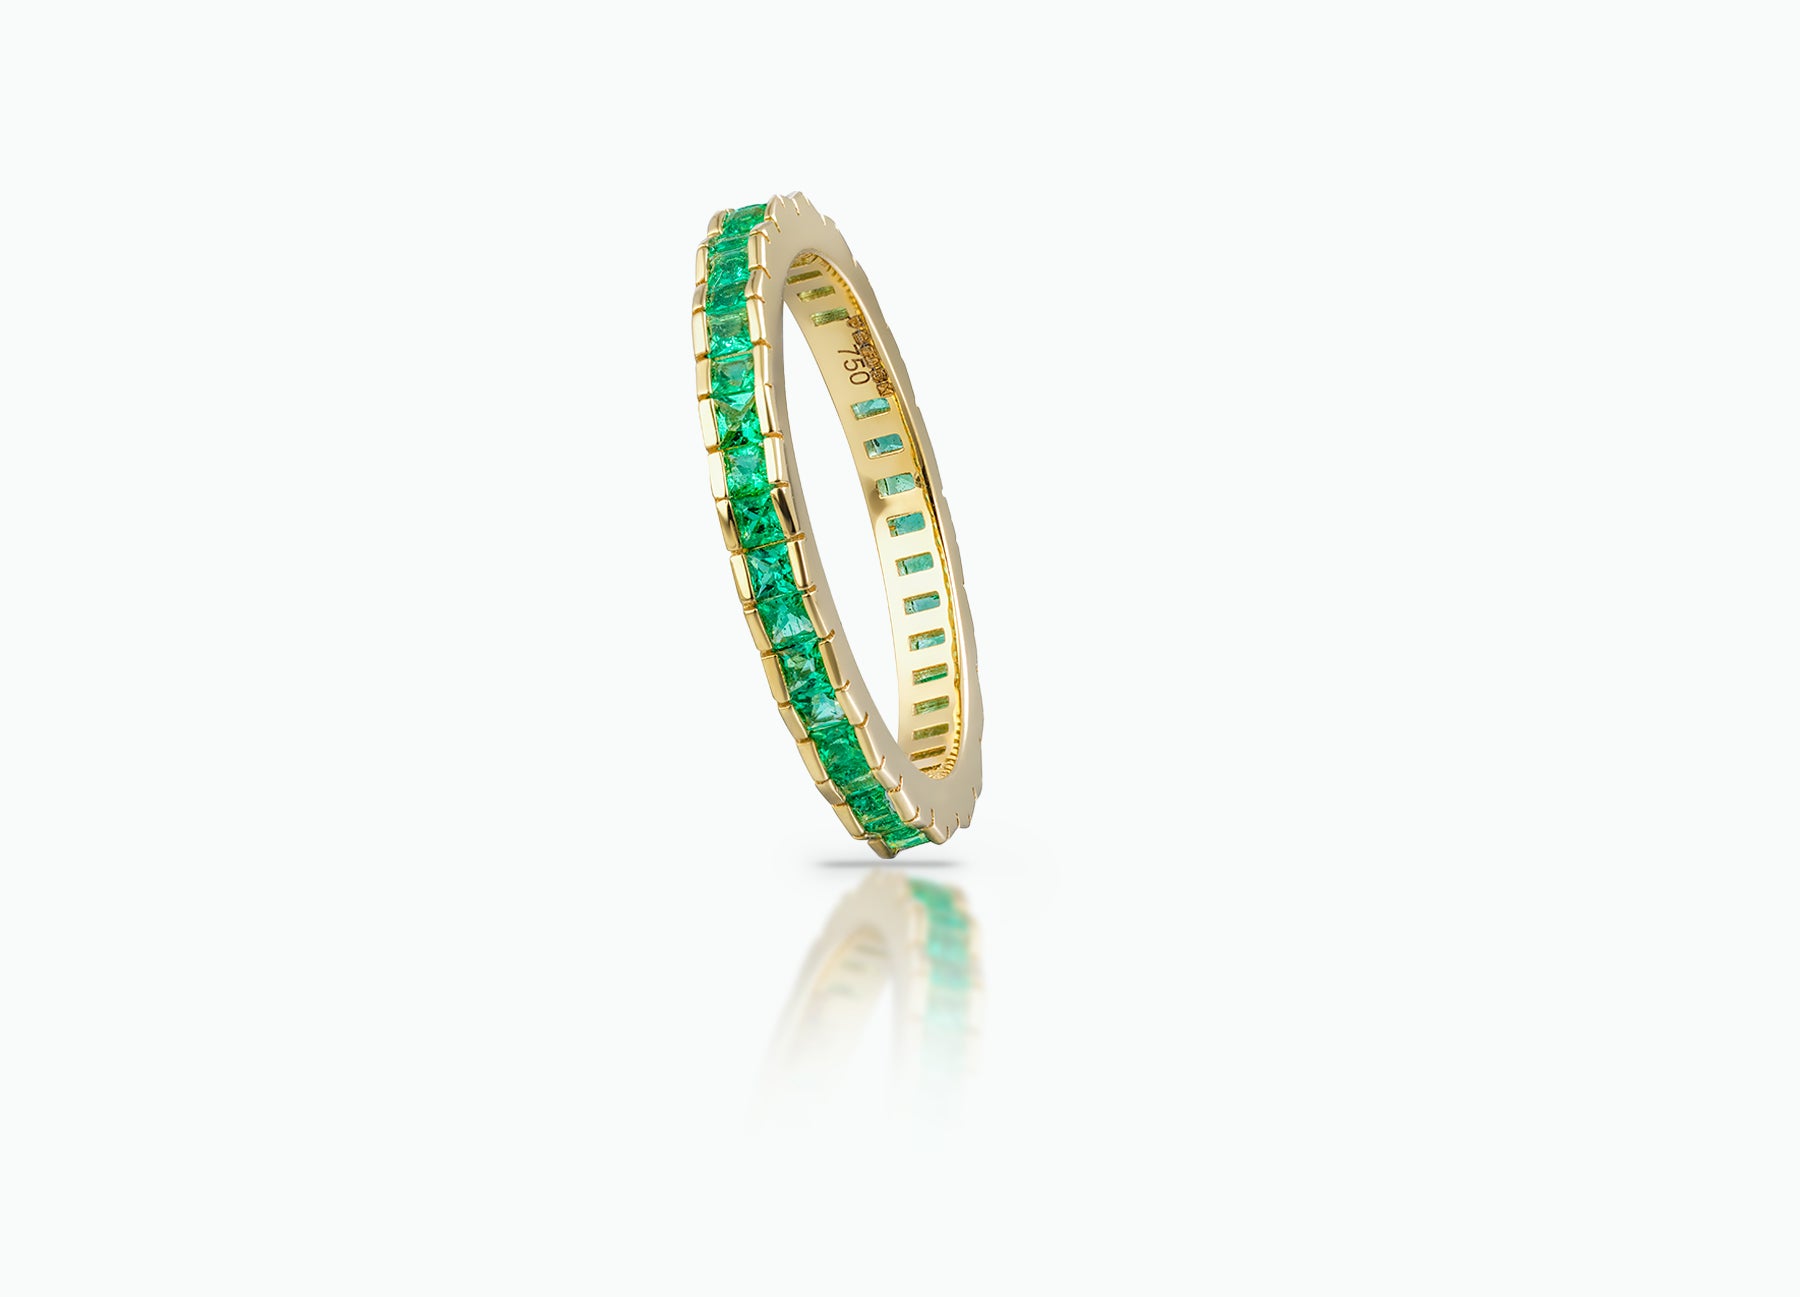 Eternity Stack Ring crafted from 18k yellow Gold and set with Emeralds.